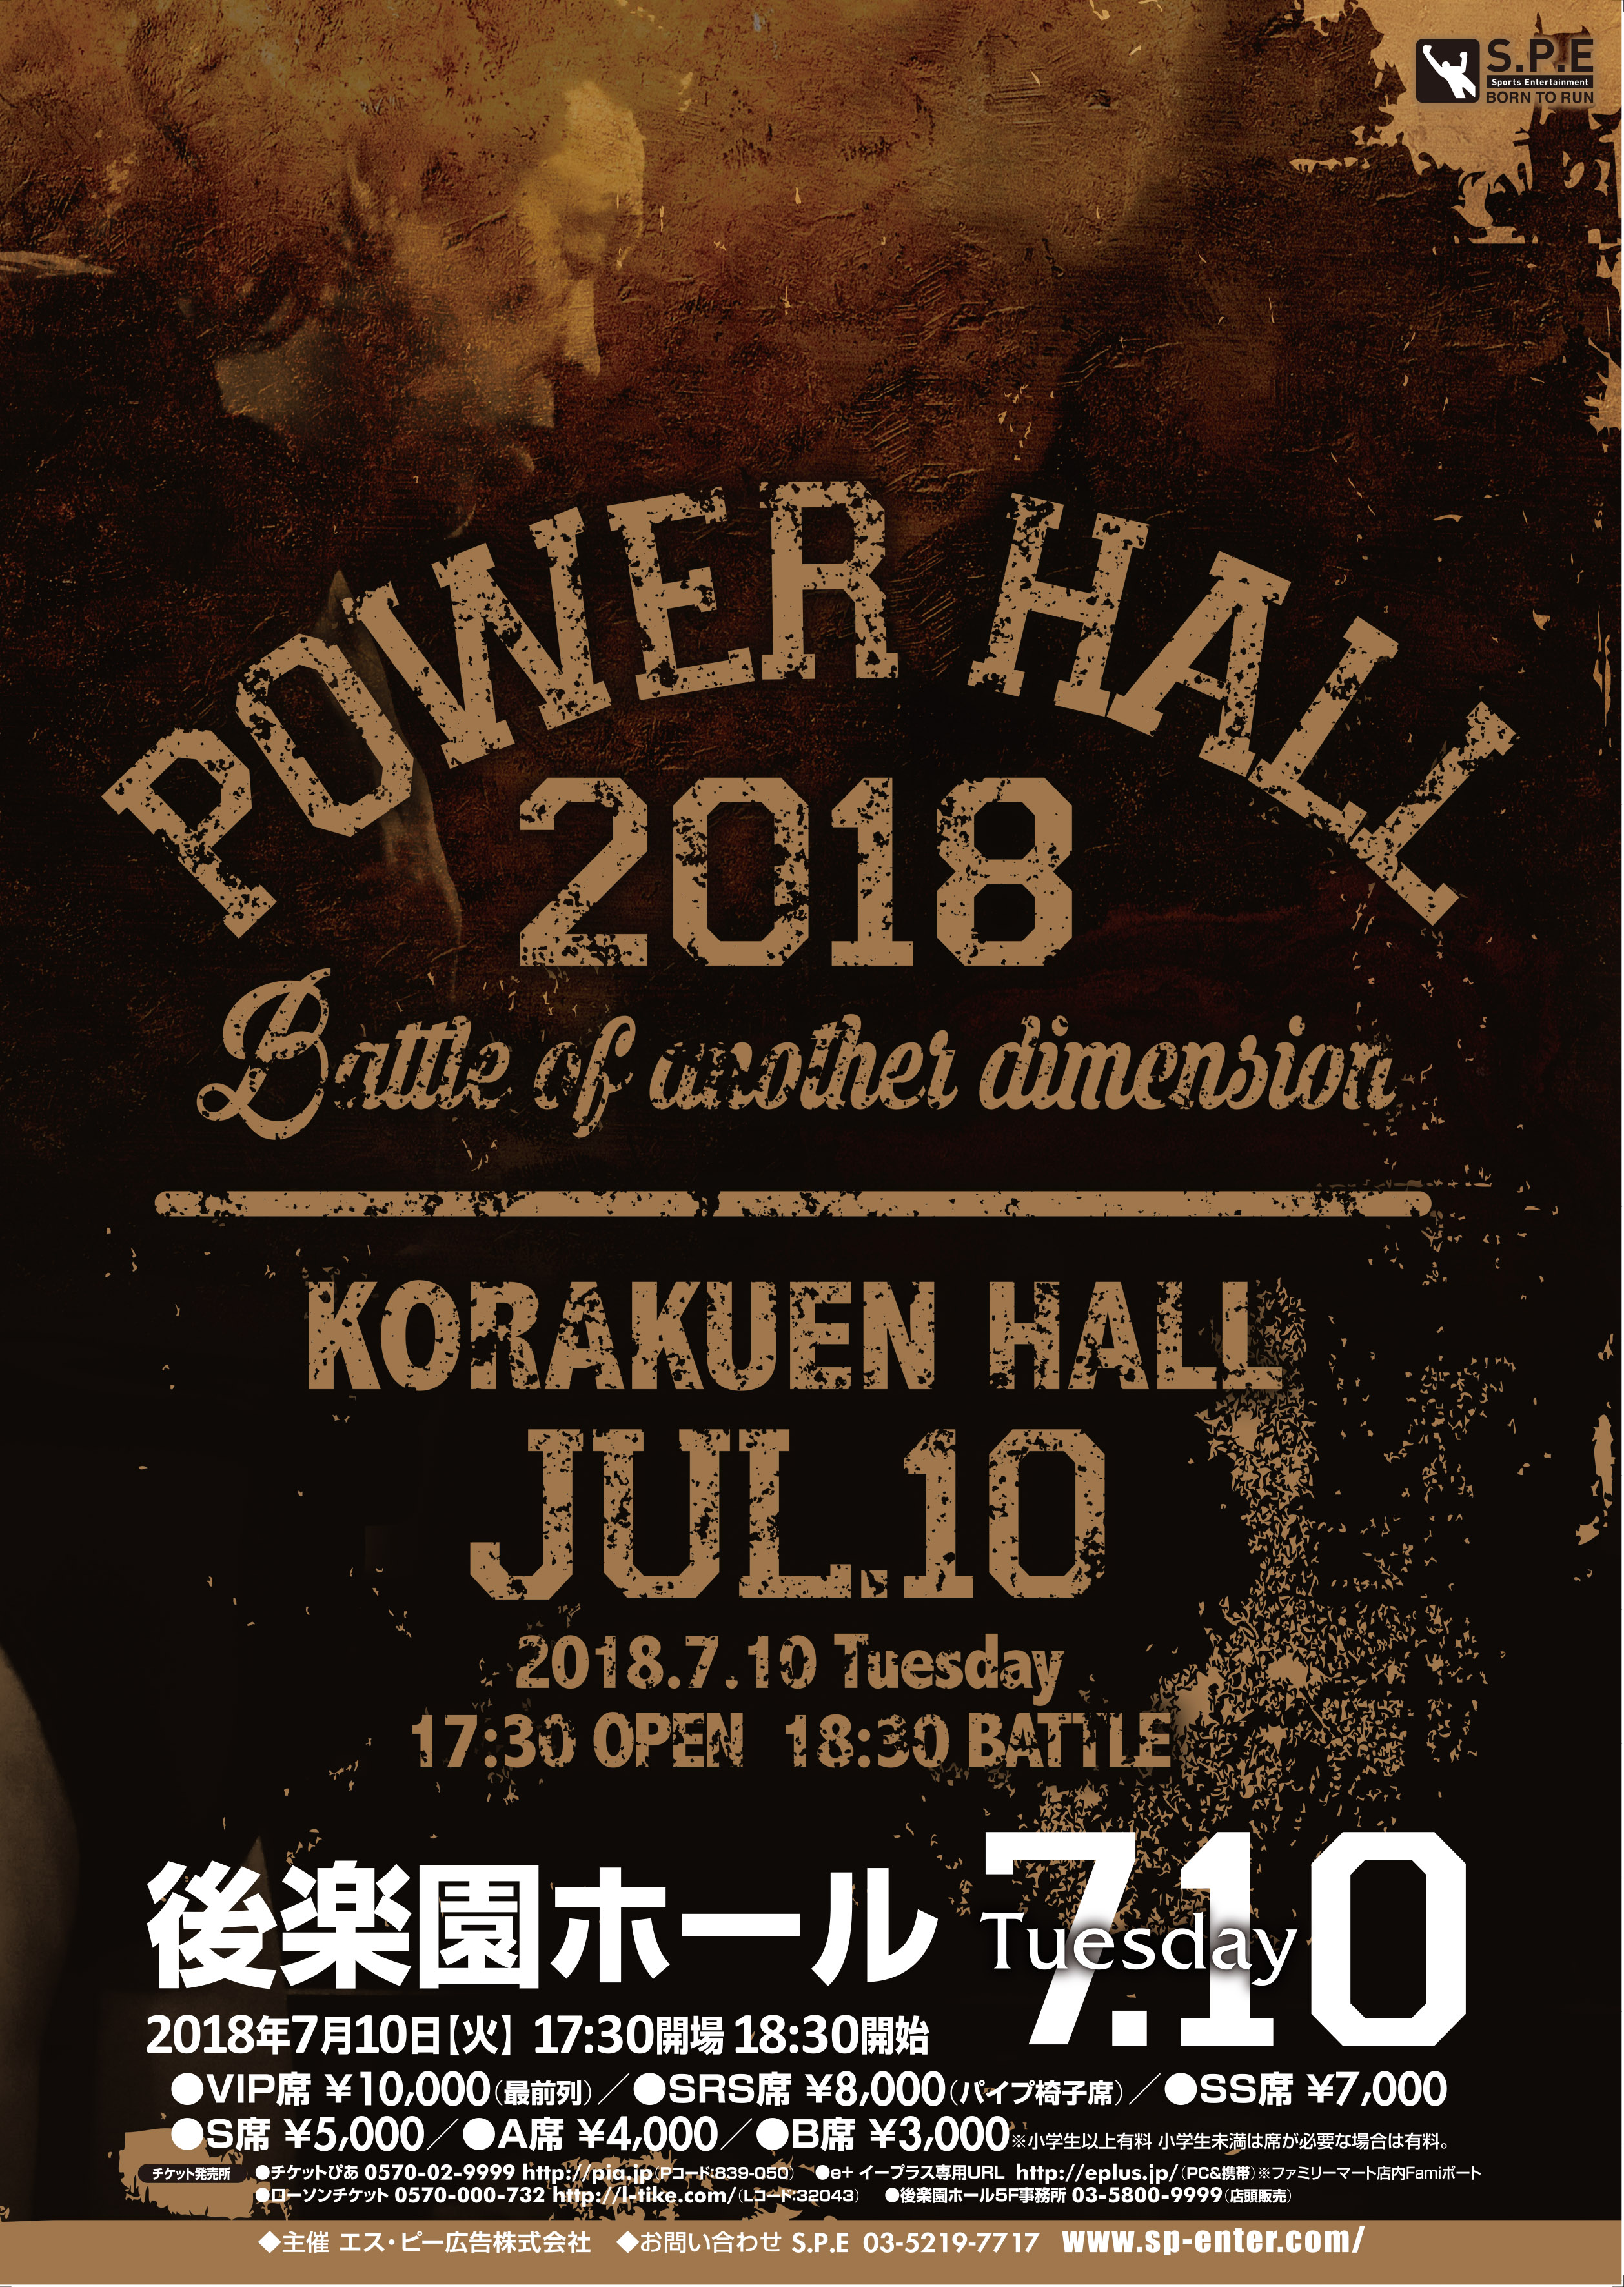 POWER HALL 2018
～Battle of another dimension～